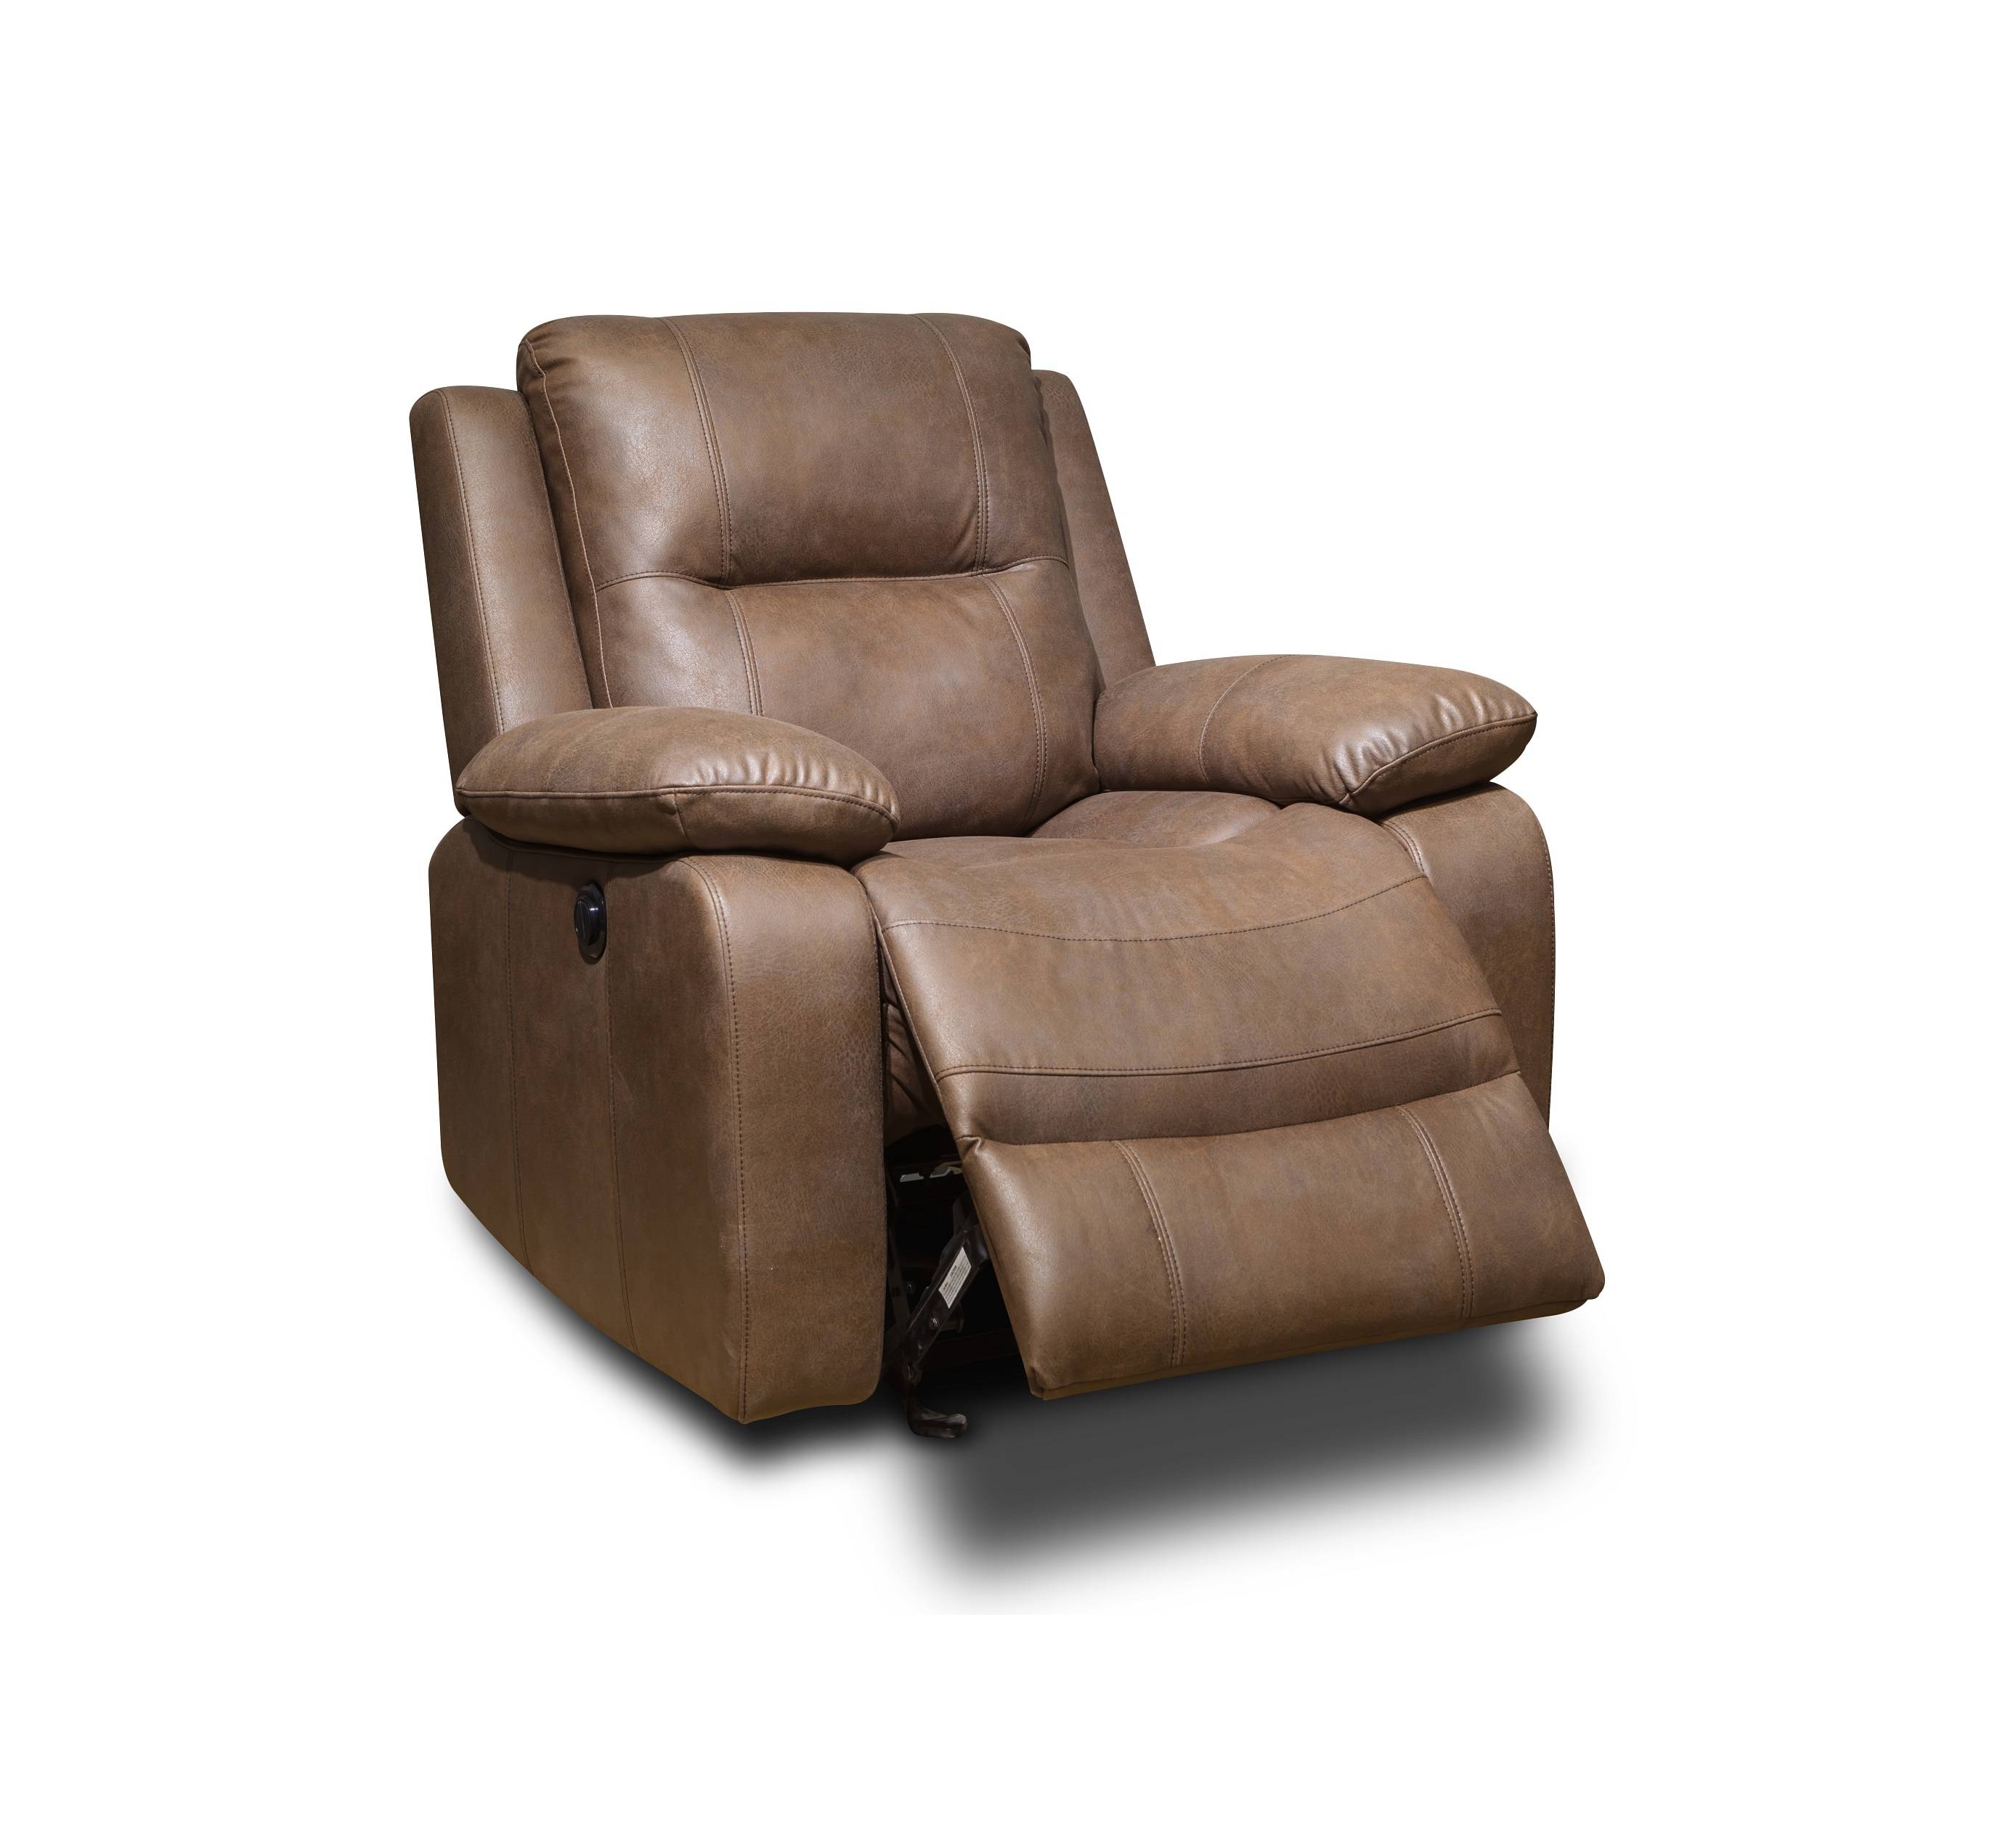 Fancy living room furniture electric rocking recliner sofa chair